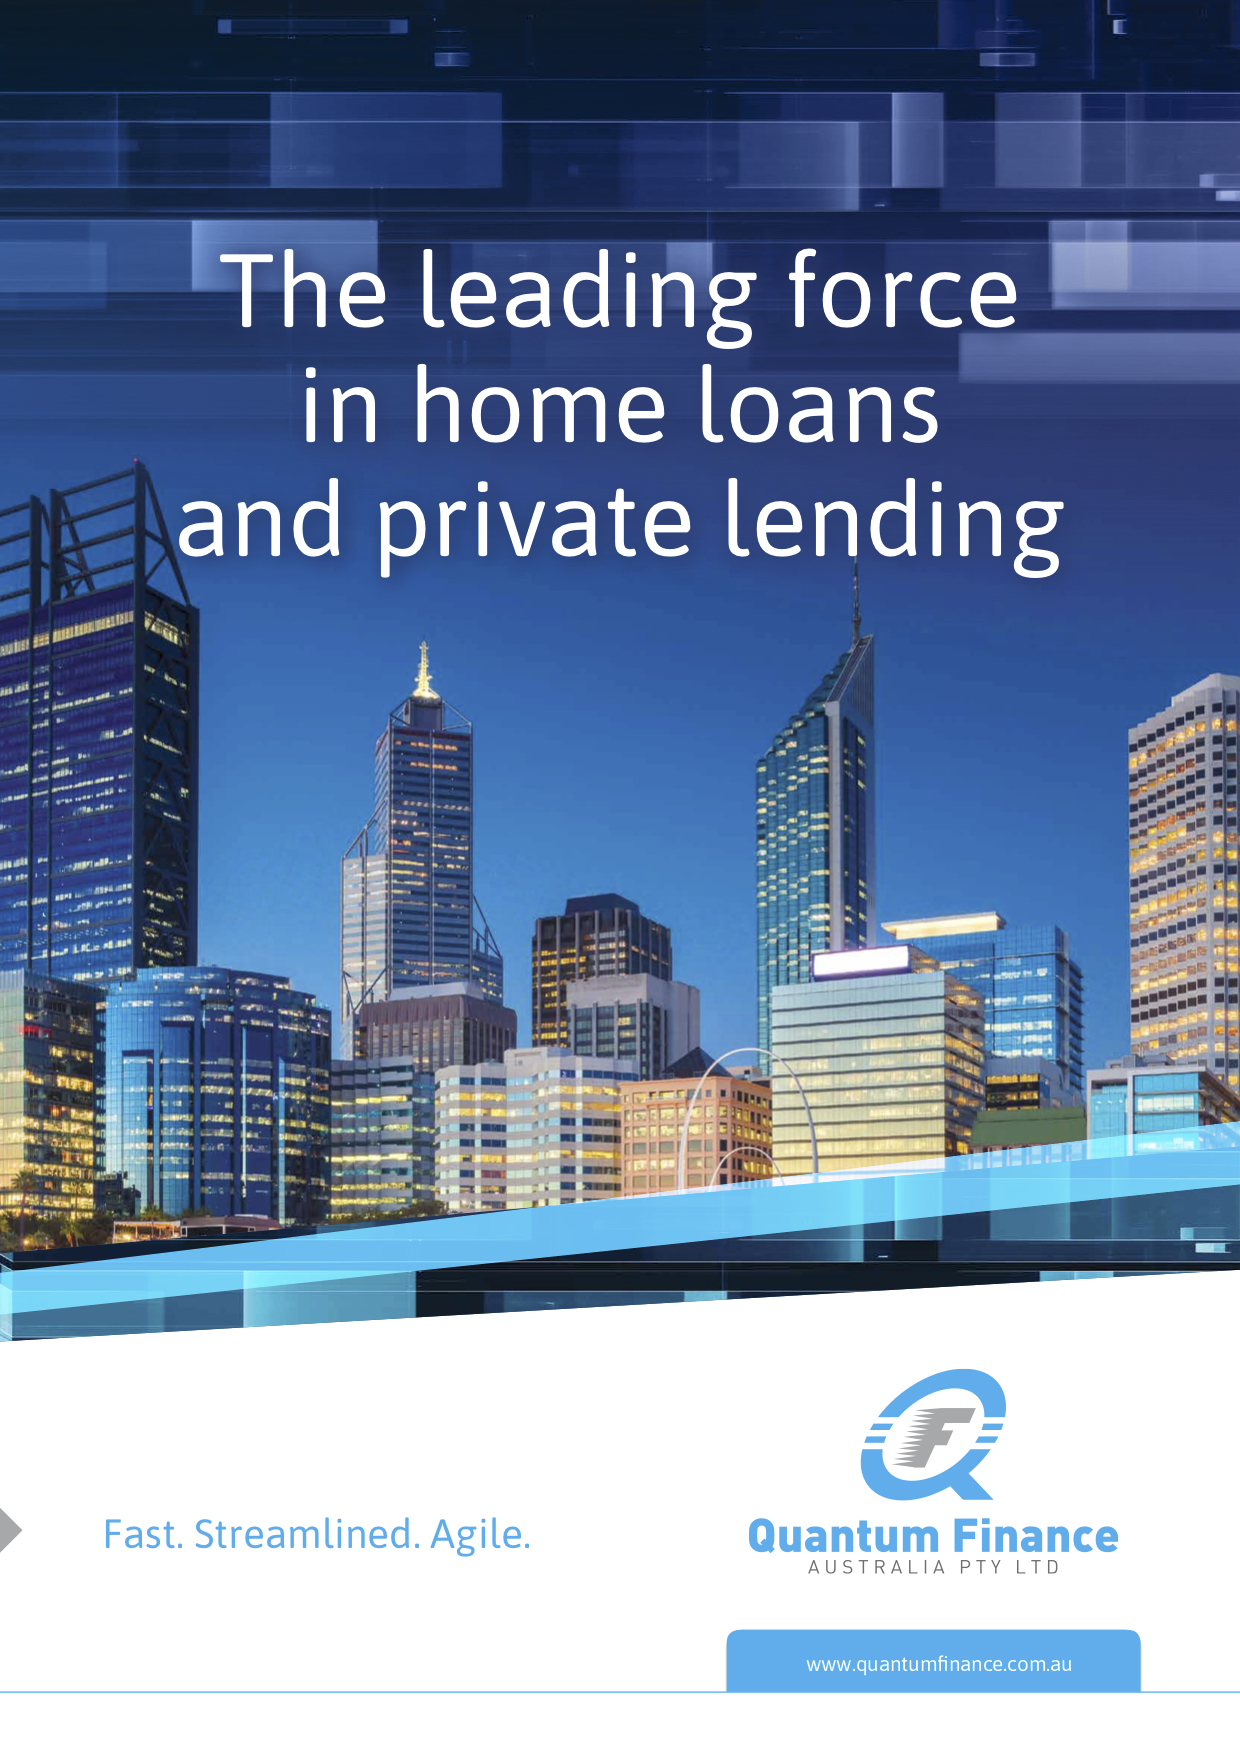 The Quantum Finance Australia Company Profile for facilitating home finance and private lending solutions